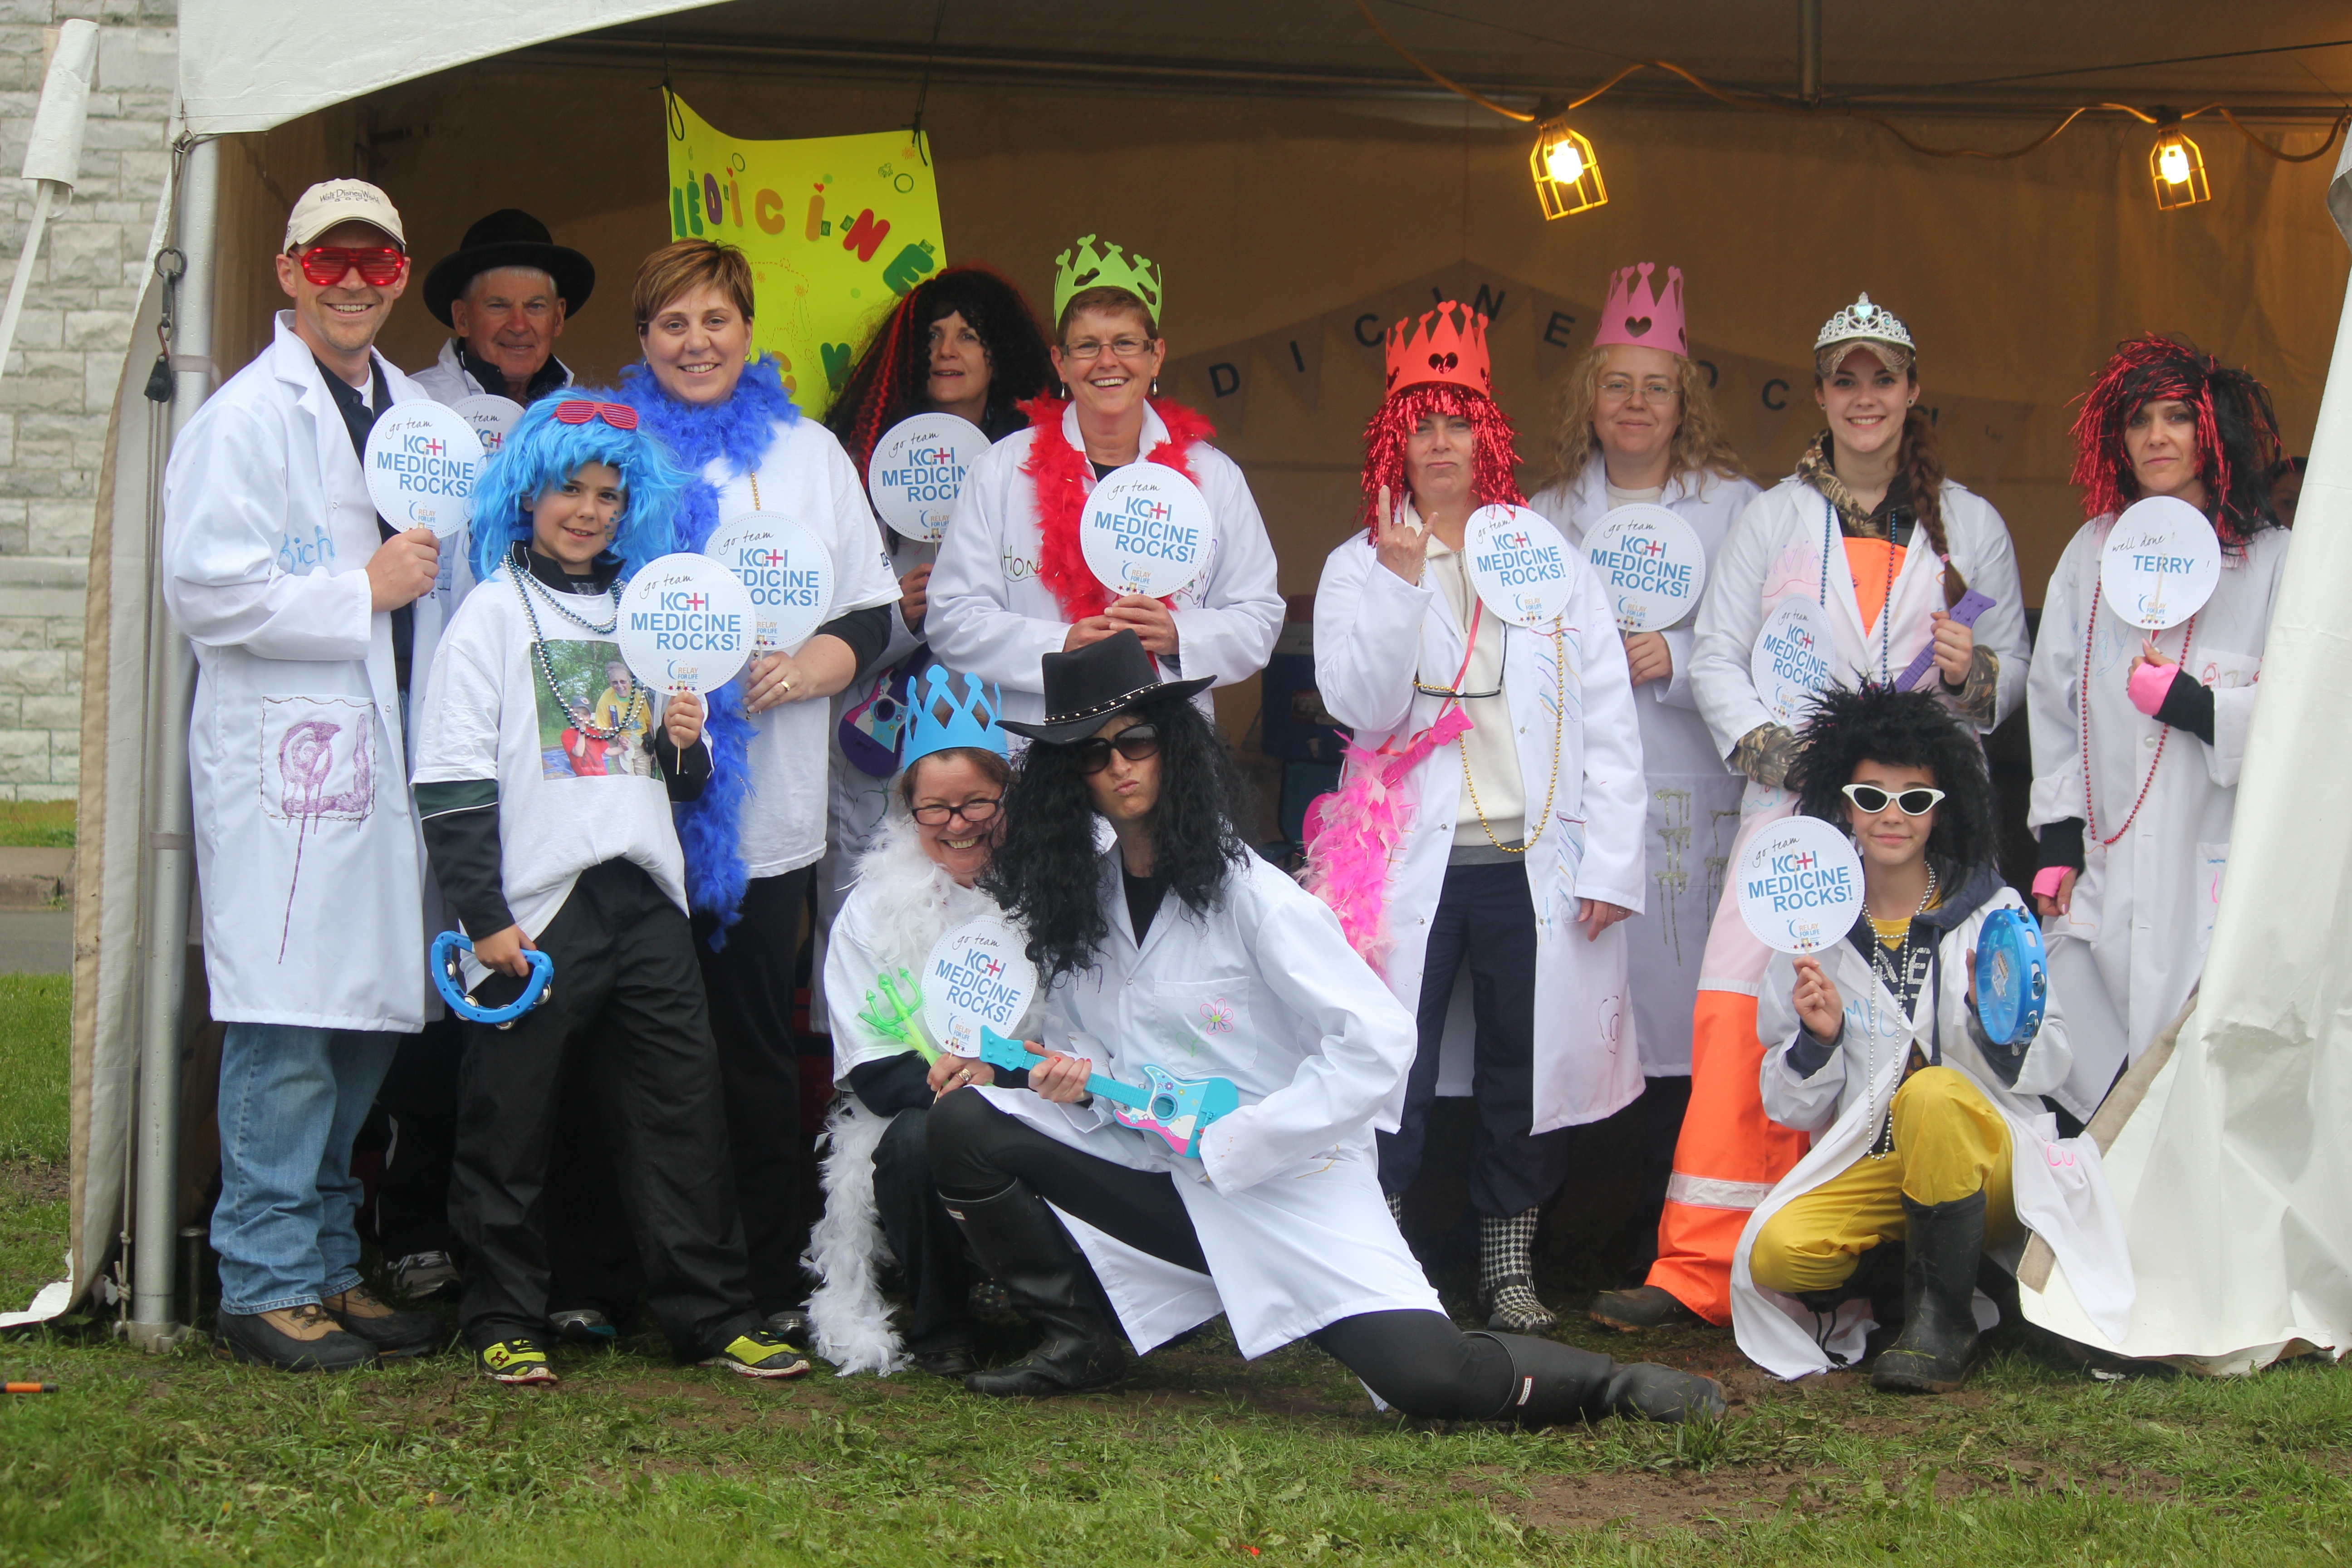 KGH’s Medicine Rocks team was our hospital’s biggest fundraiser at the relay last year, bringing in almost $7,000. 